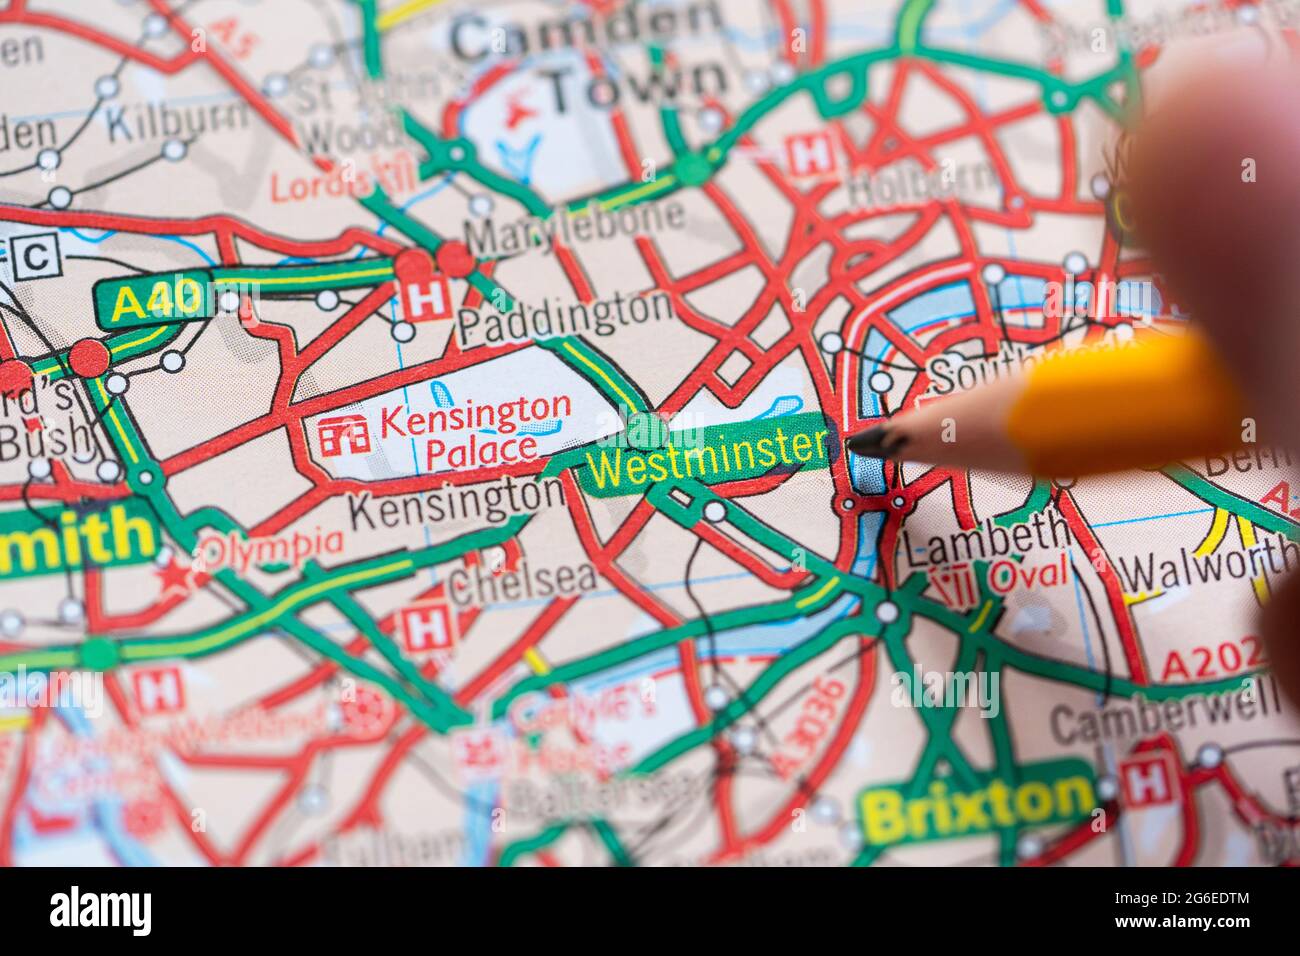 Closeup of a page in a printed road map atlas with a man's hand holding a pencil pointing at the district of Westminster in Central London, England Stock Photo